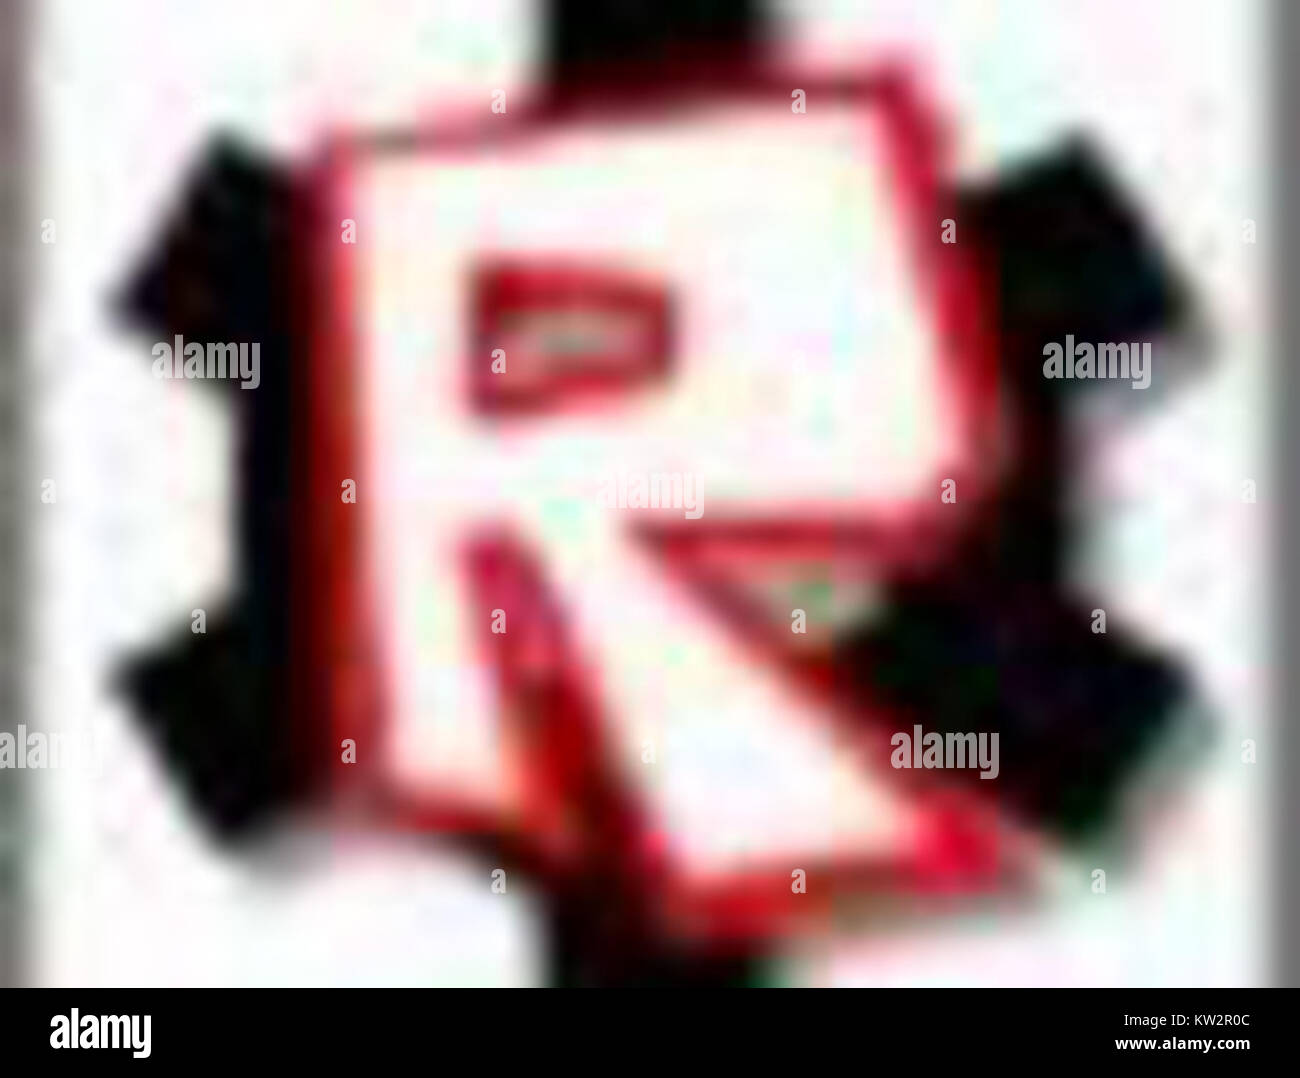 All Roblox Logos Used In Roblox